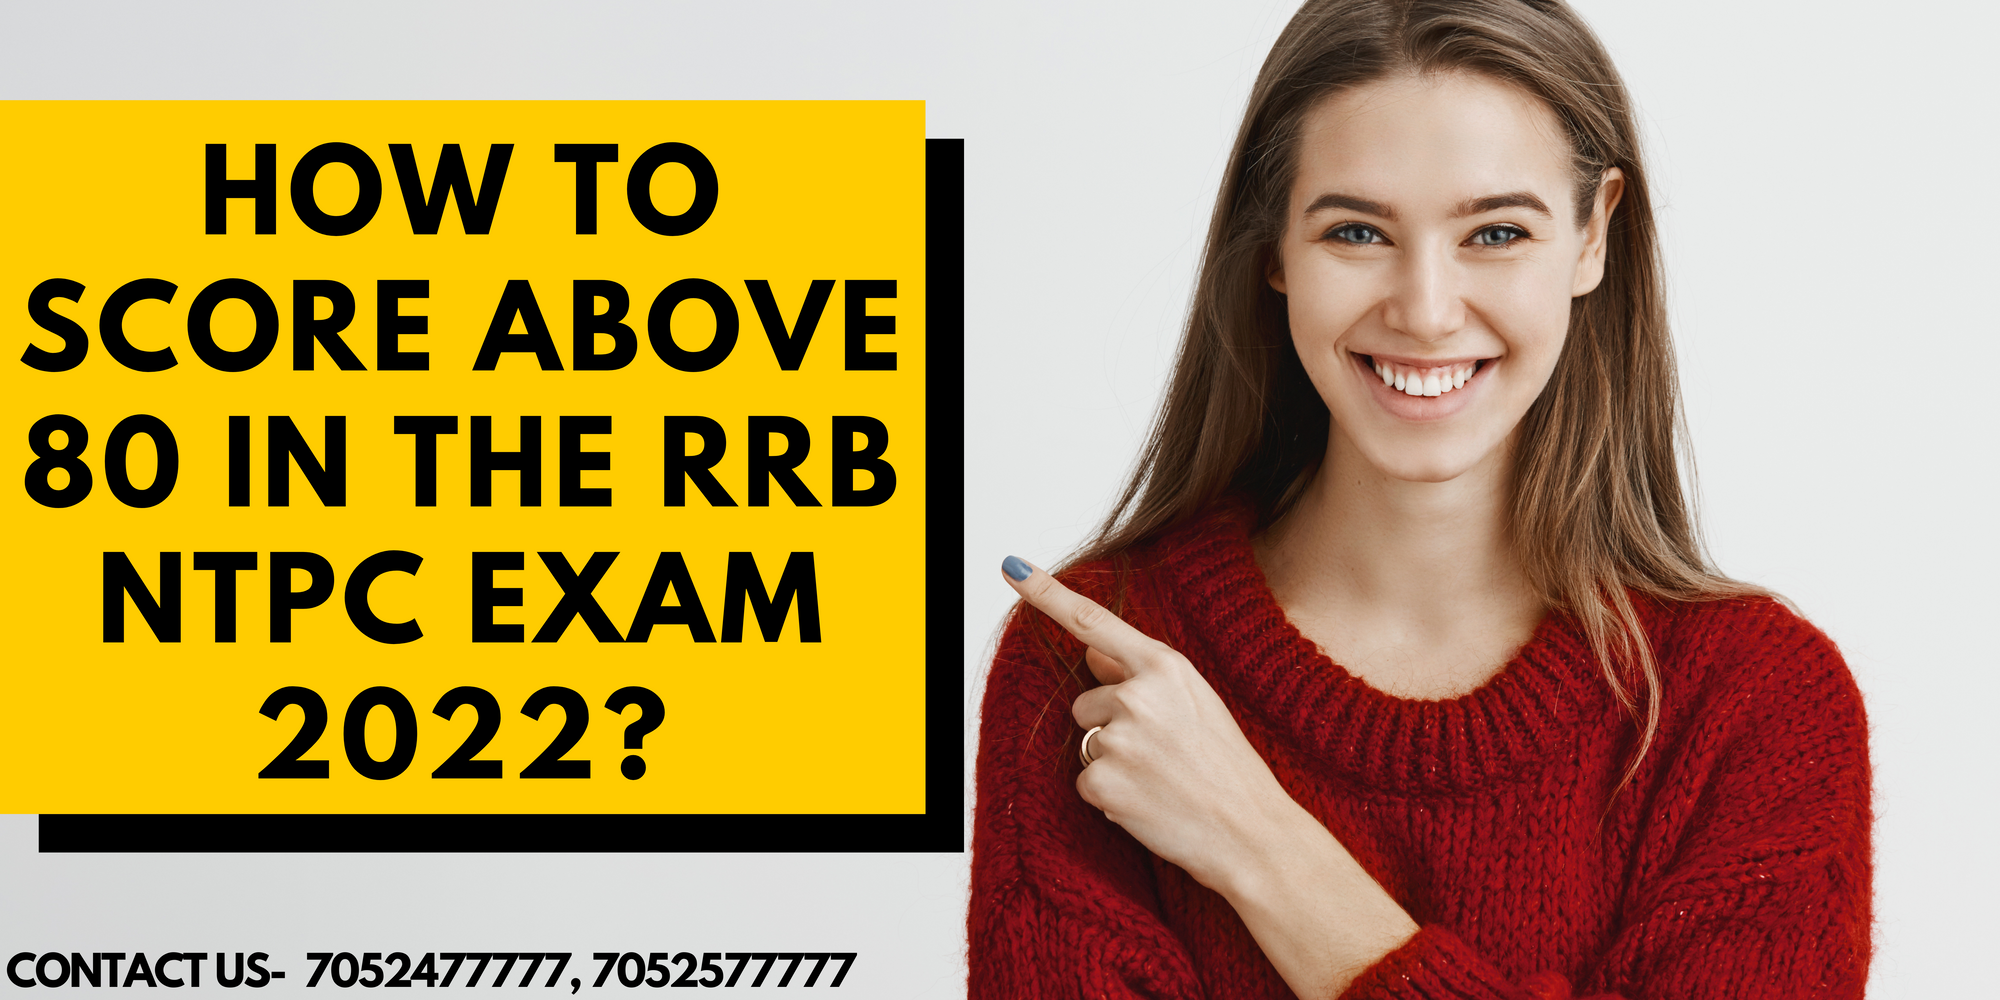 Tips For RRB NTPC Exam 2022 To Score Above 80 Marks